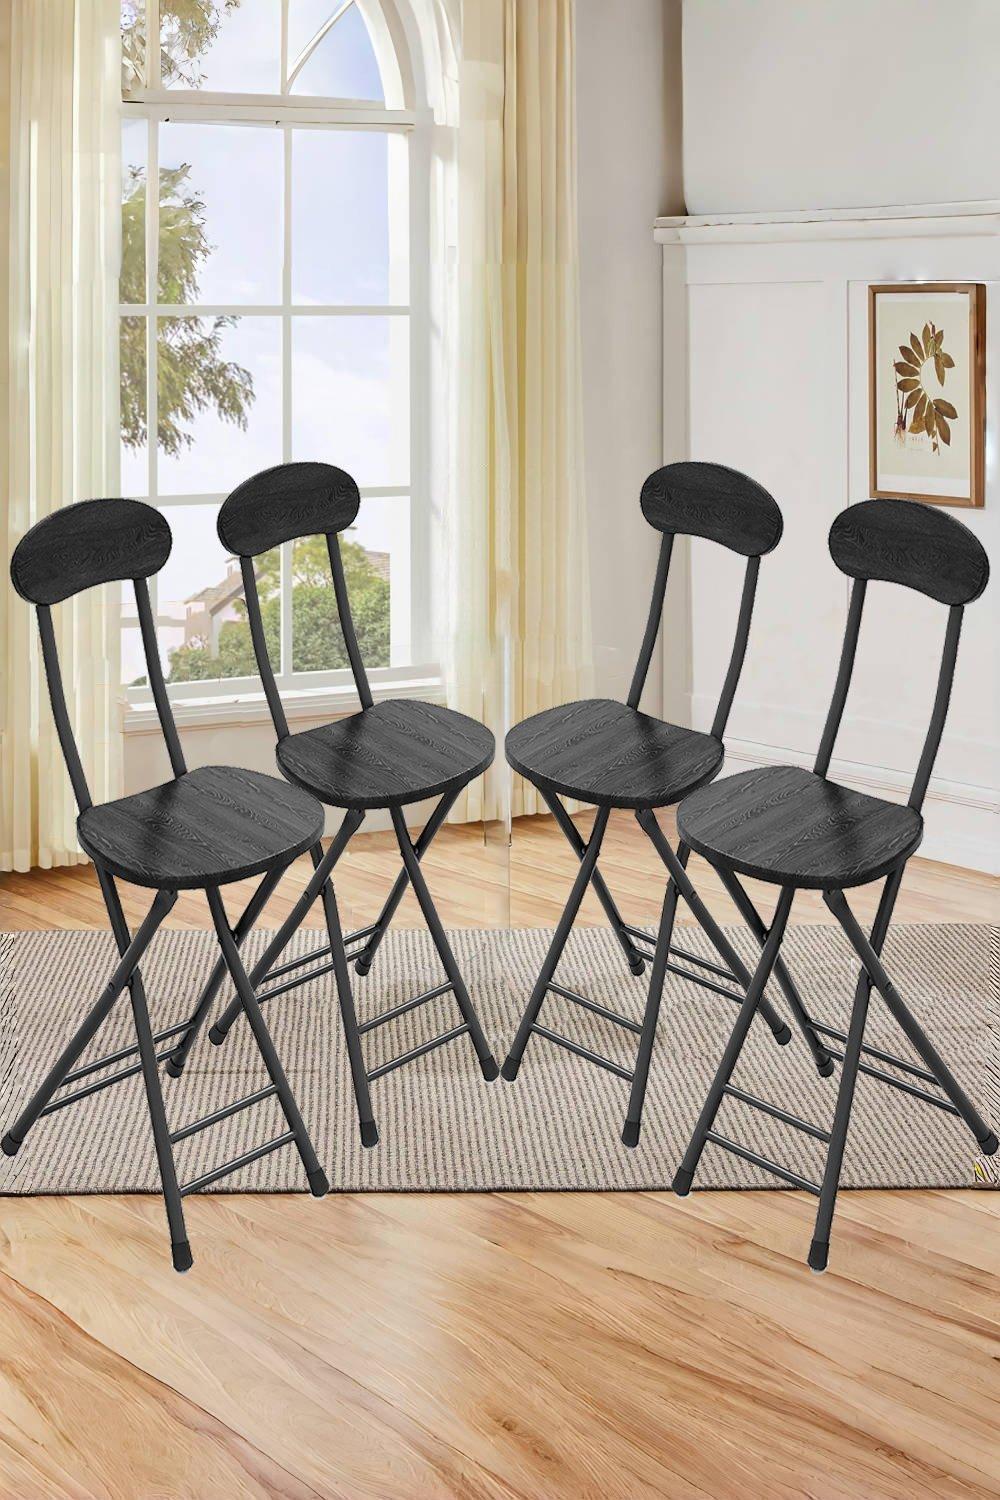 Set of 4 Compact Wooden Black Folding Chair with Metal Legs